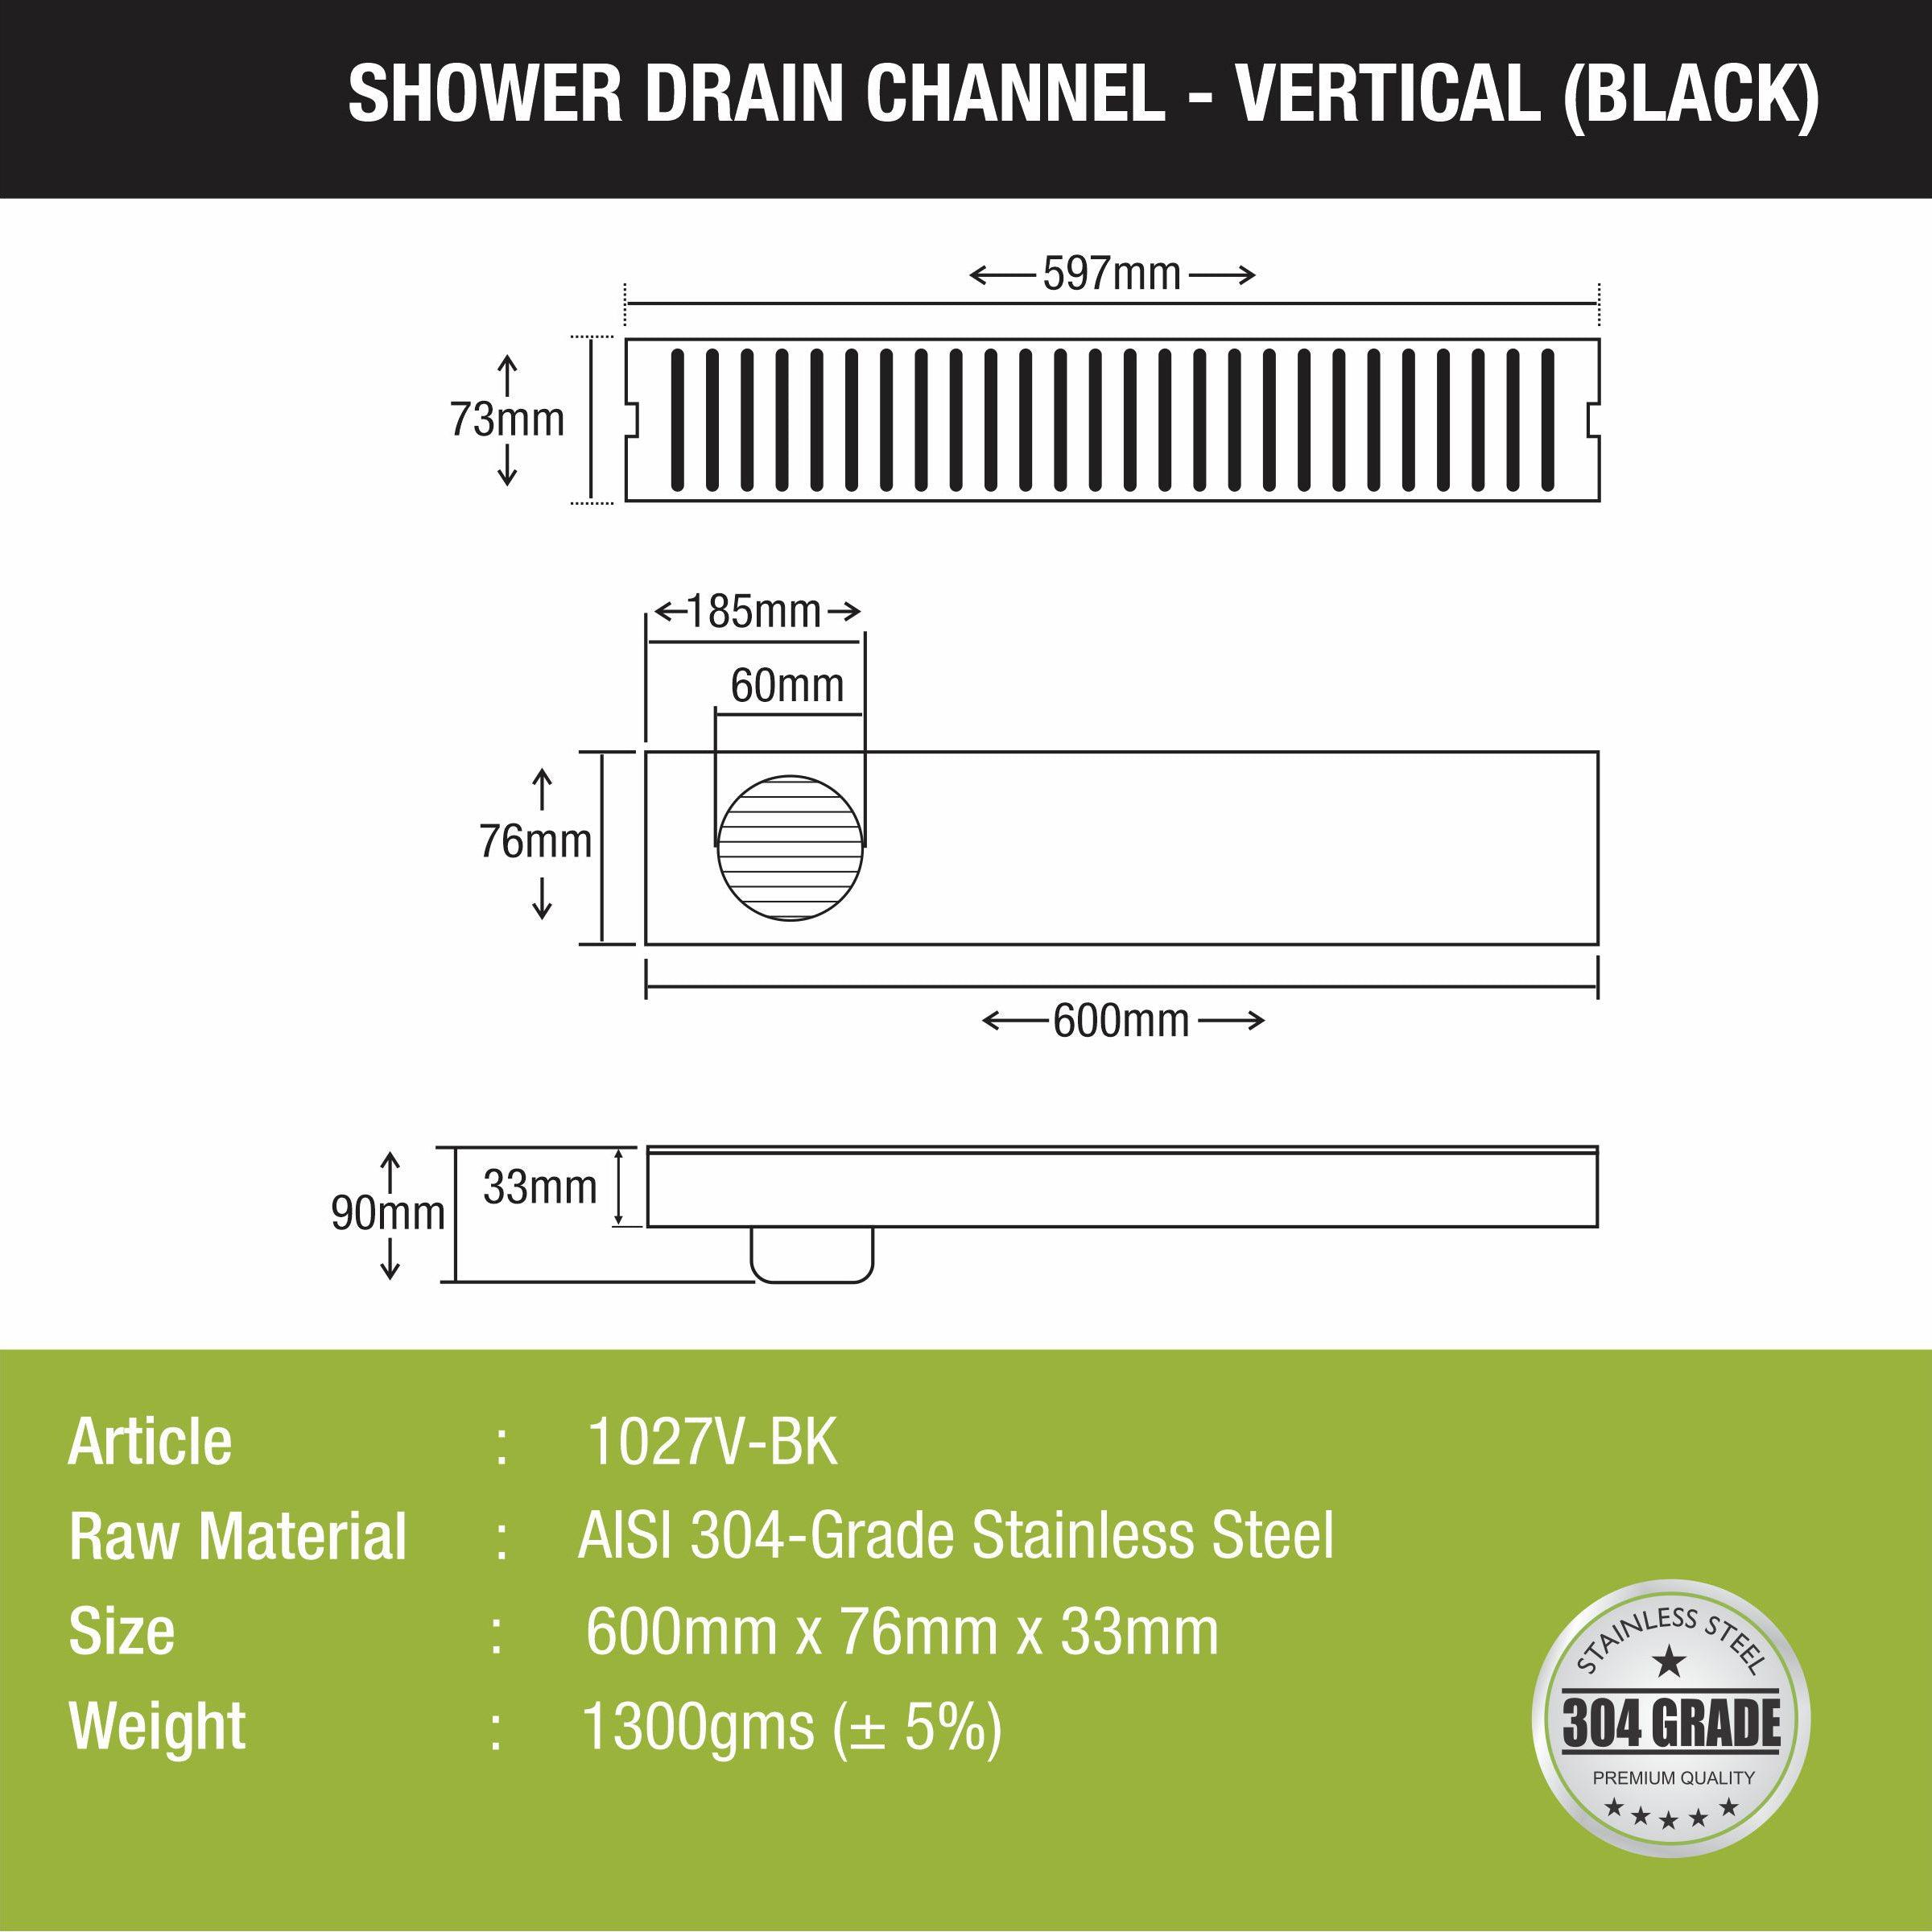 Vertical Shower Drain Channel - Black (24 x 3 Inches) size and measurement 